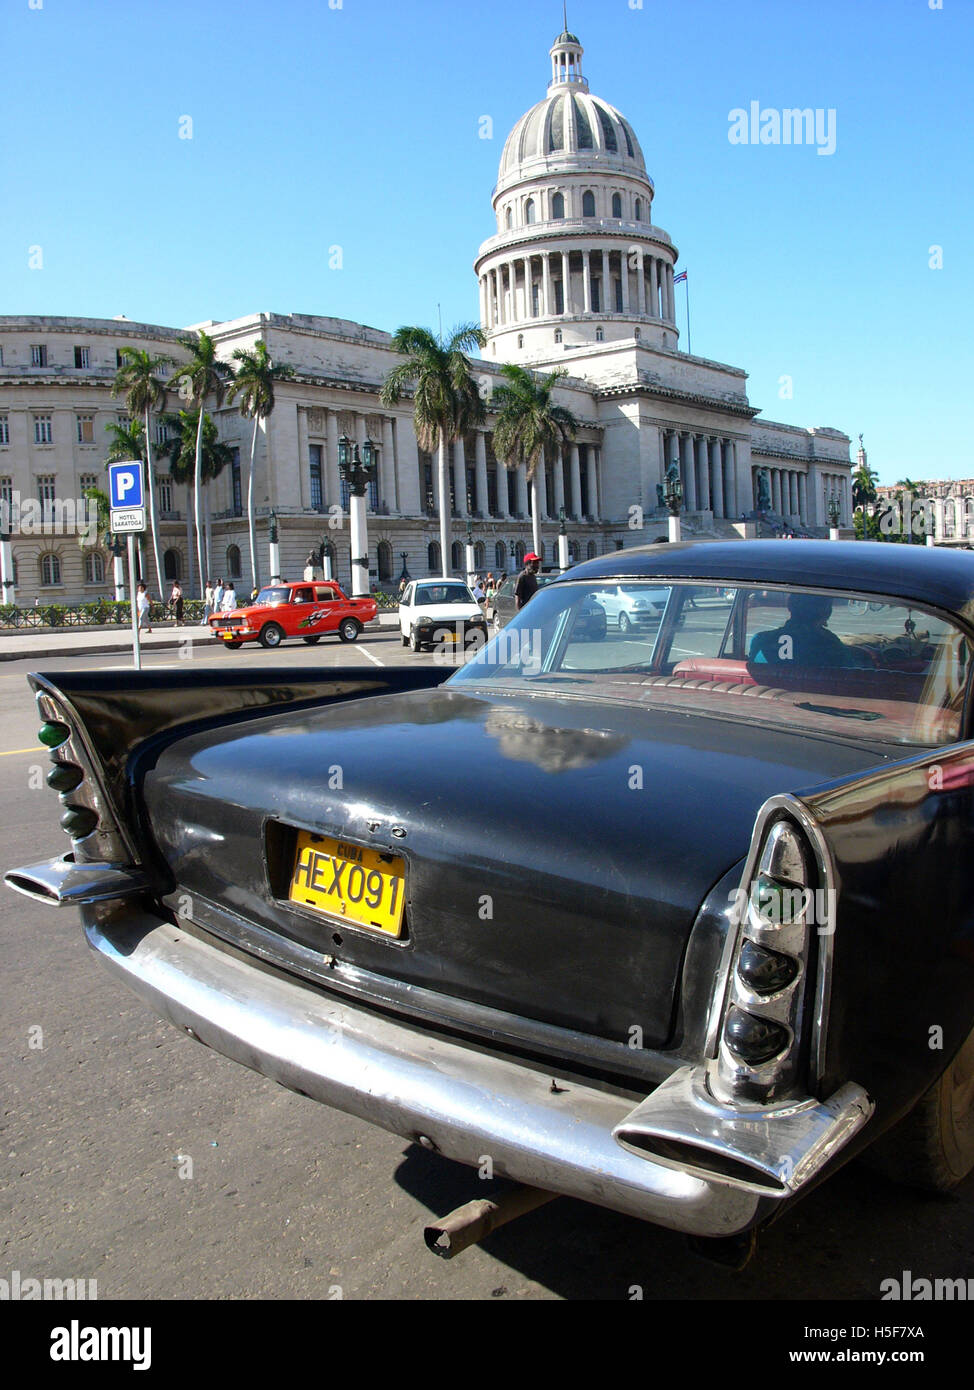 Feb 15, 2006; Havana, CUBA; One of many Cuban Maquinas, aka Yank tanks or pre 1960 American Classic cars in the streets of Havana  with Capitolio Nacional (National Capitol building). One in eight cars in Cuba today is a pre-1960s American brand Ford, Chevrolet, Cadillac, Chrysler, Packard and other classic models. The Republic of Cuba is located in the northern Caribbean and south of the United States. The first European to visit Cuba was explorer Christopher Columbus in 1492. Centuries of colonial rule and revolutions followed. Batista was deposed by Fidel Castro and Che guevara in 1953. Aft Stock Photo